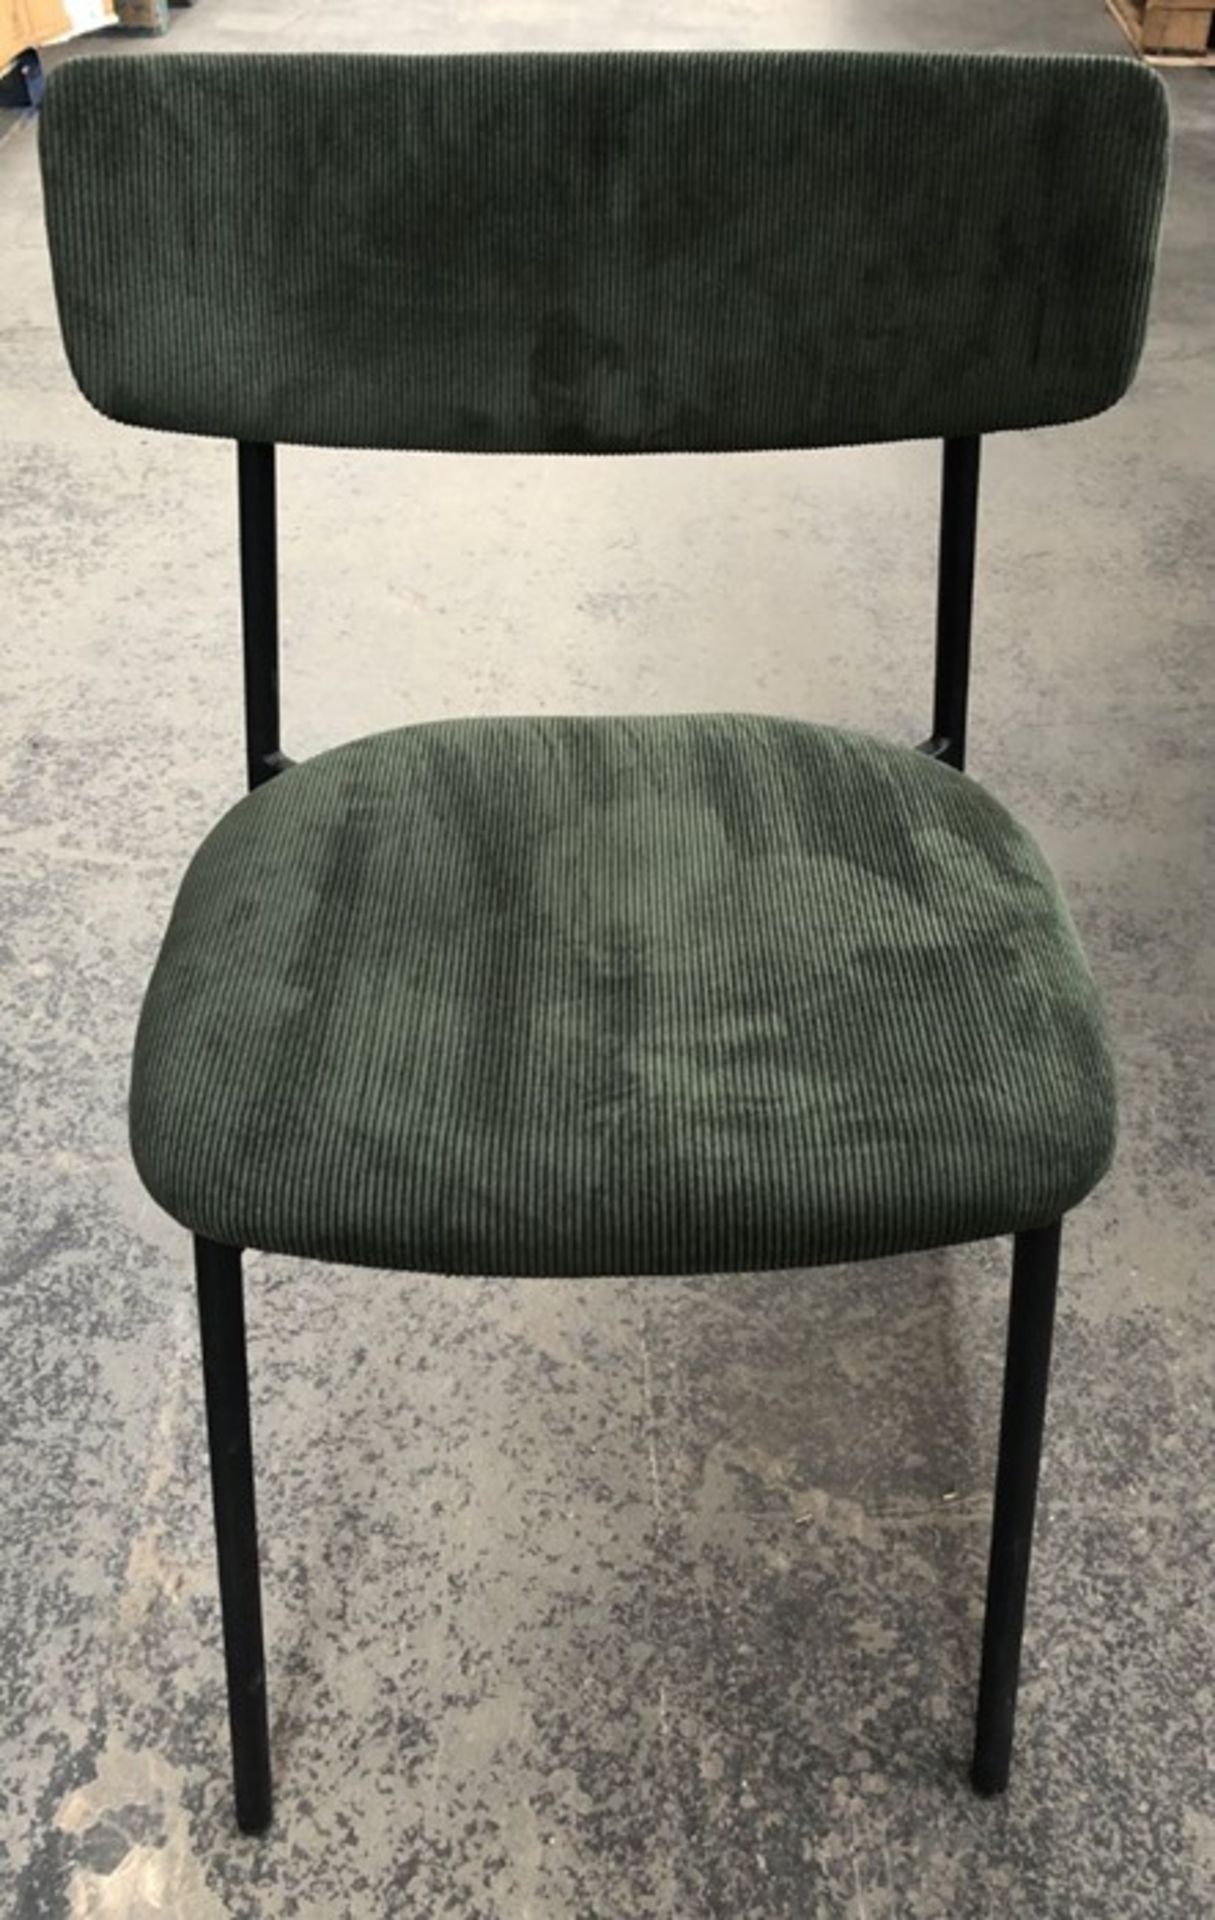 JOHN LEWIS MOTION CORDUROY UPHOLSTERED DINING CHAIR